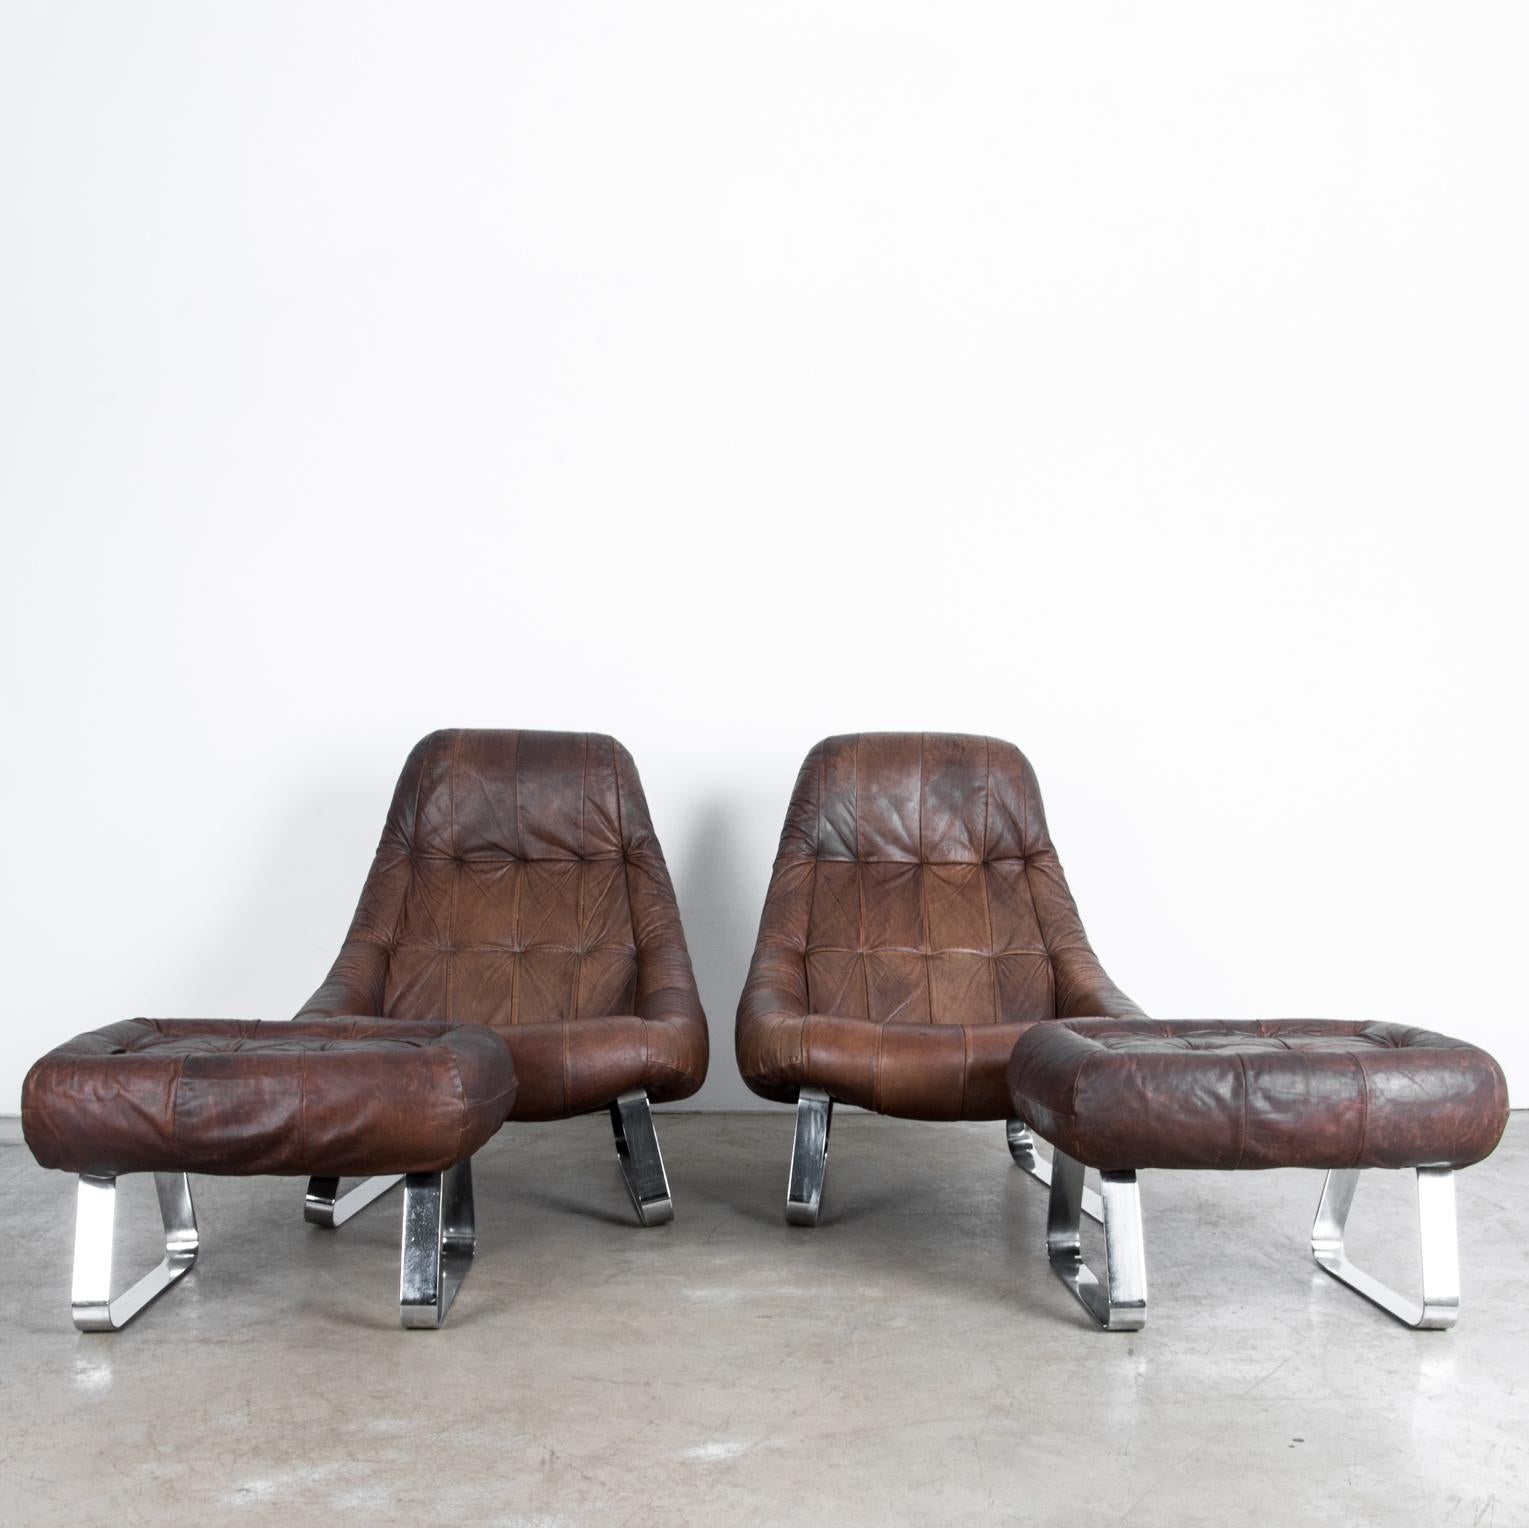 Late 20th Century Percival Lafer Dark Brown Chrome Leather Earth Chair with Ottoman, a Pair